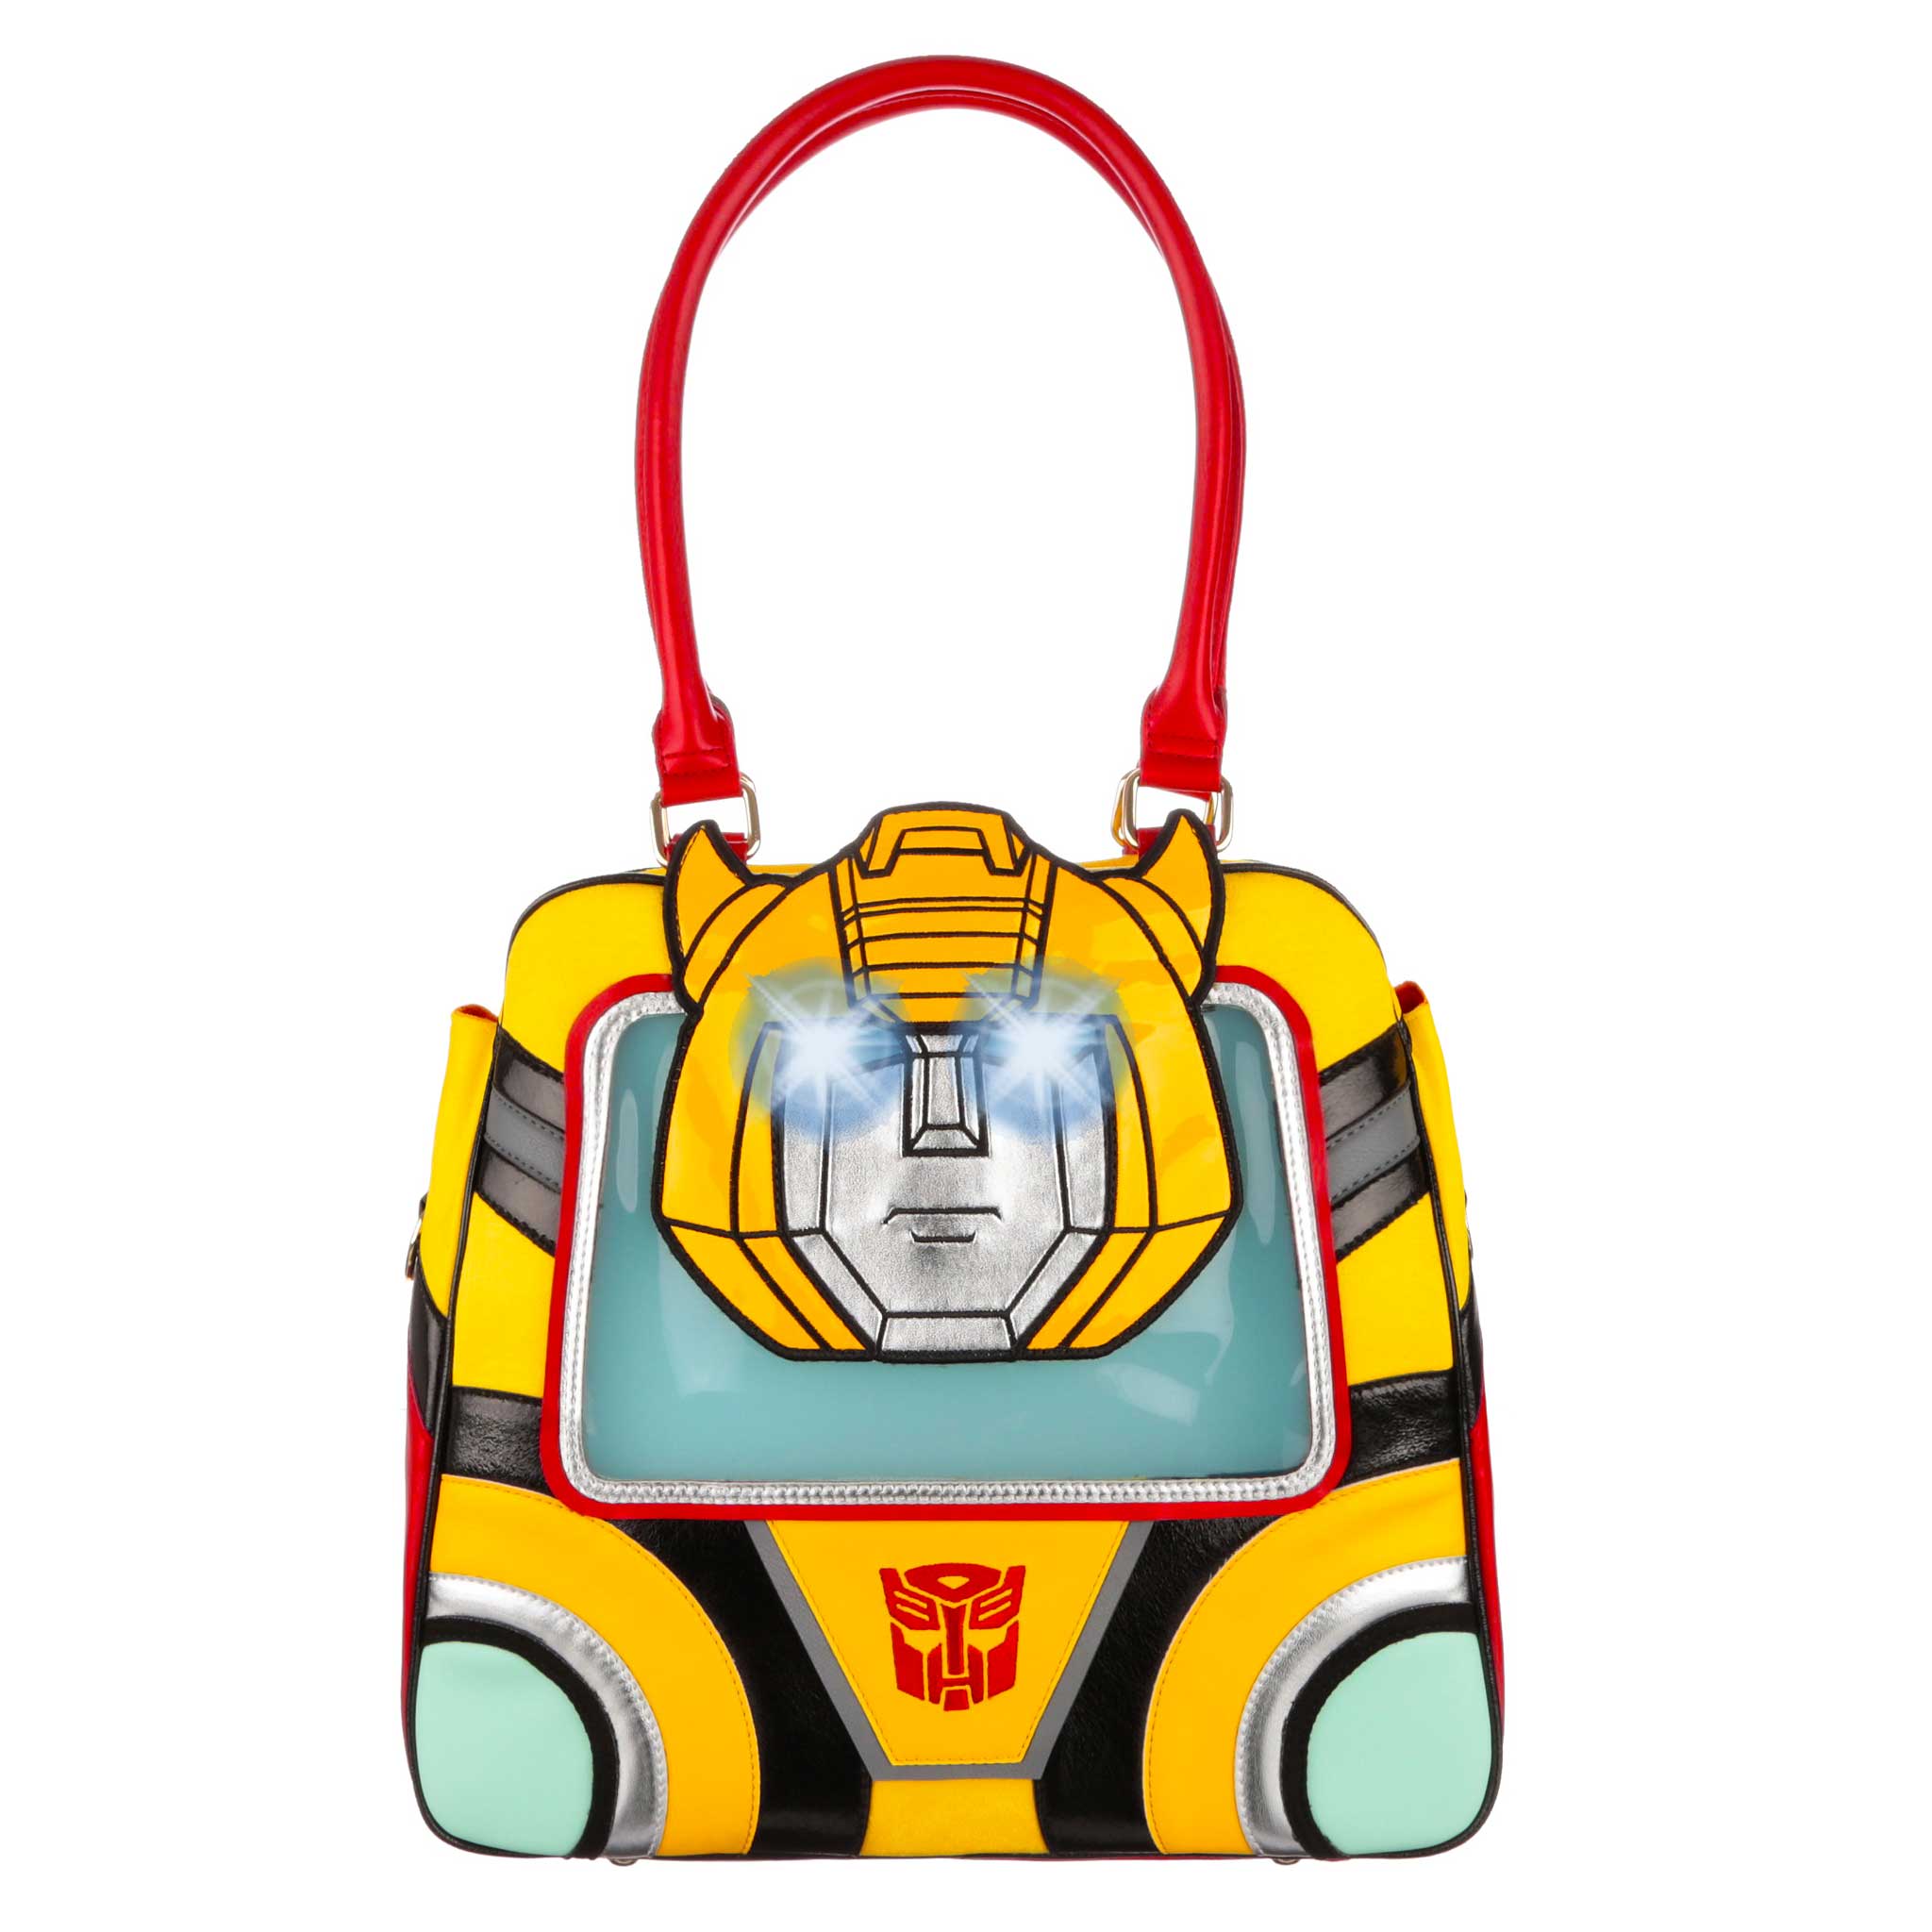 A large yellow Transformers themed handbag with a large red handle that sits at the top of the bag. A big holdall made up of bold black and yellow stripes with a red Decepticon logo at the bottom of the bag. The face of Decepticon Transformer Bumblebee sits on the front of the bag with large flashing eyes. Red and black piping finish off this large handbag. 